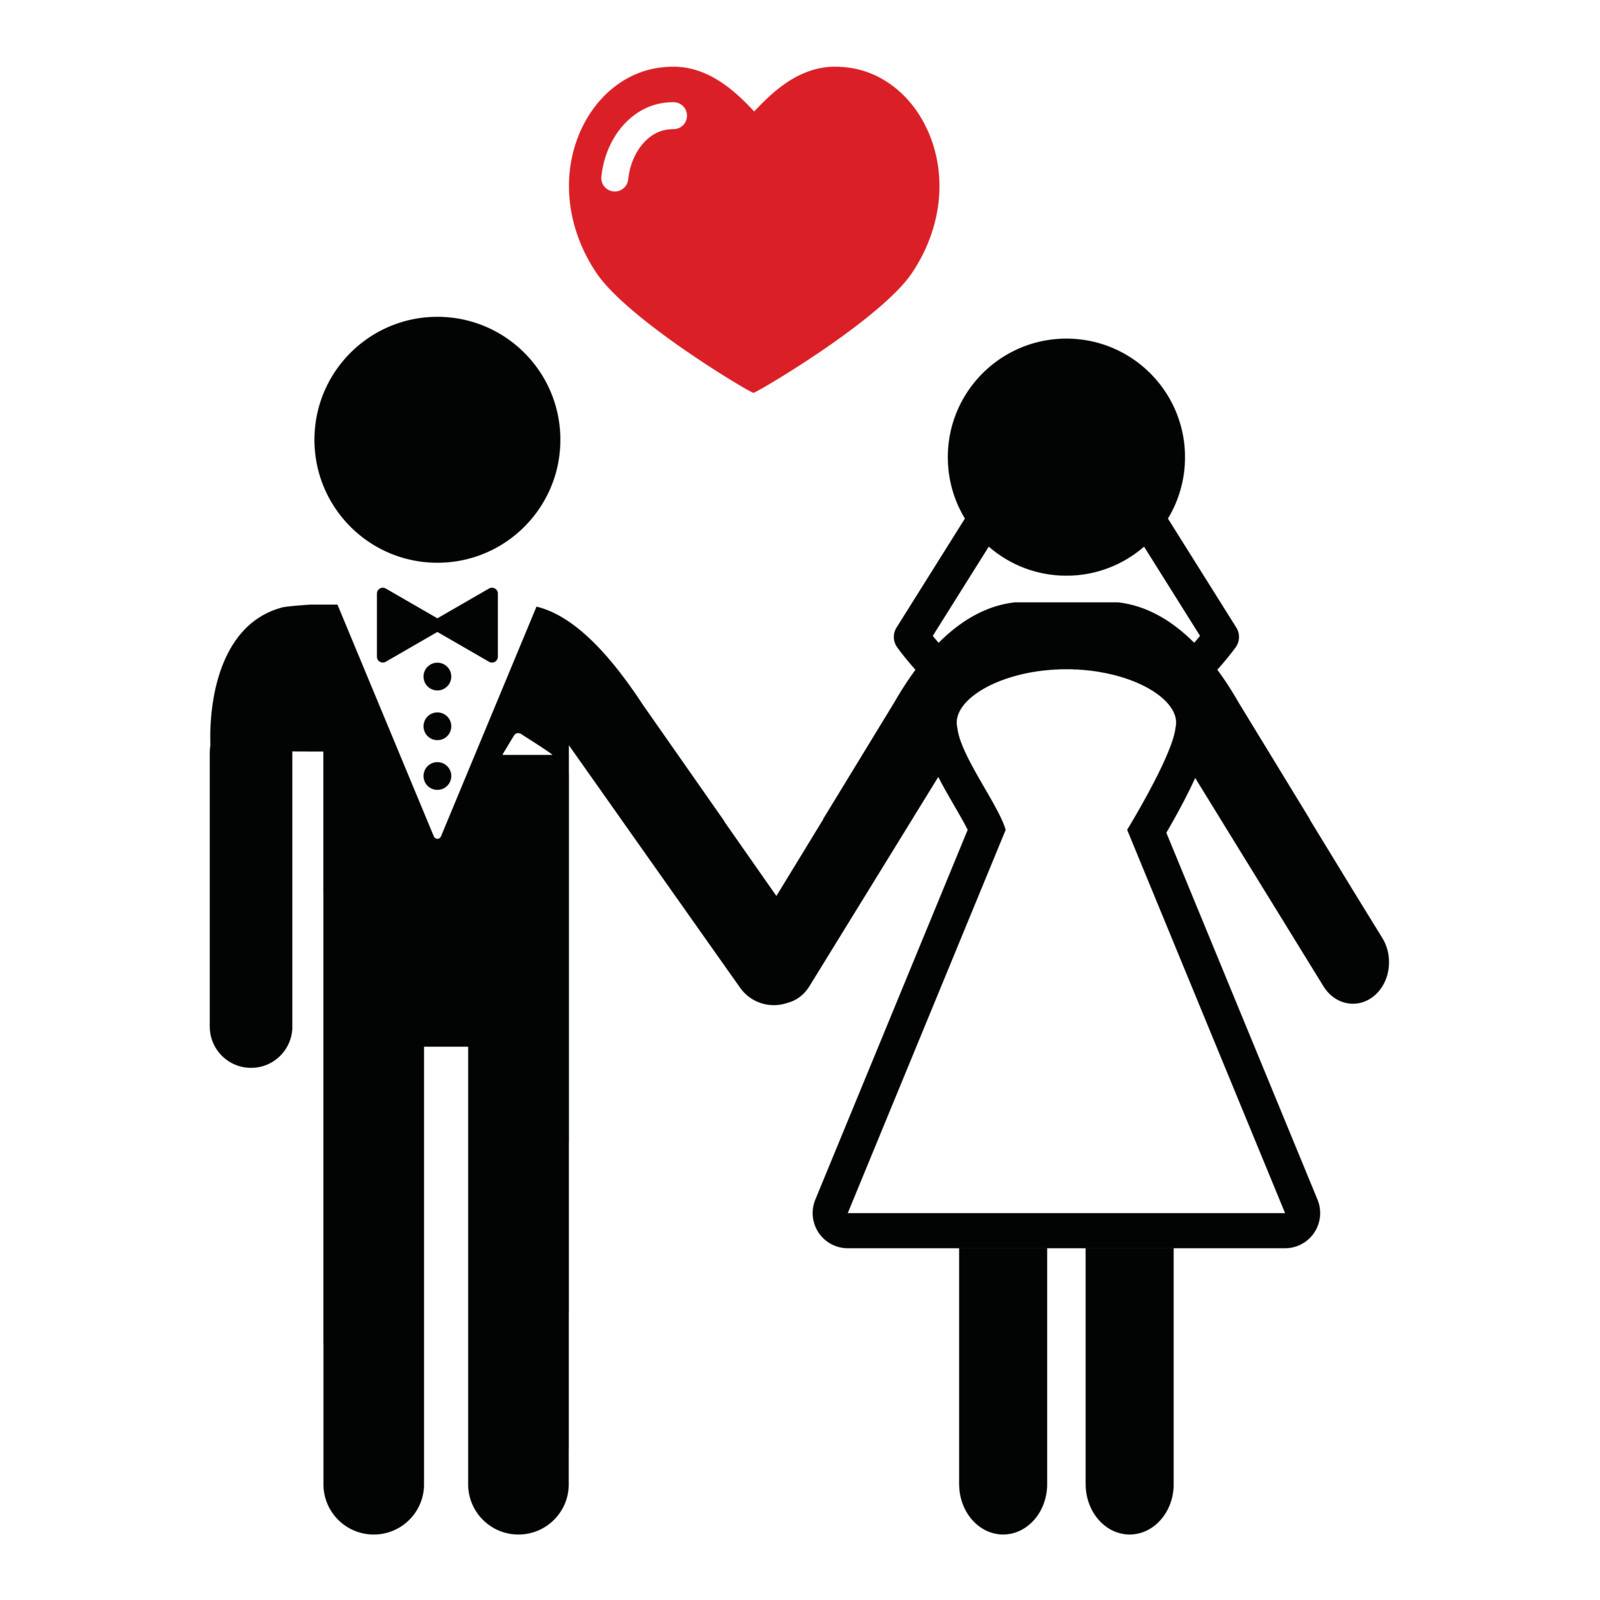 Newlywed couple black simple icon with heart